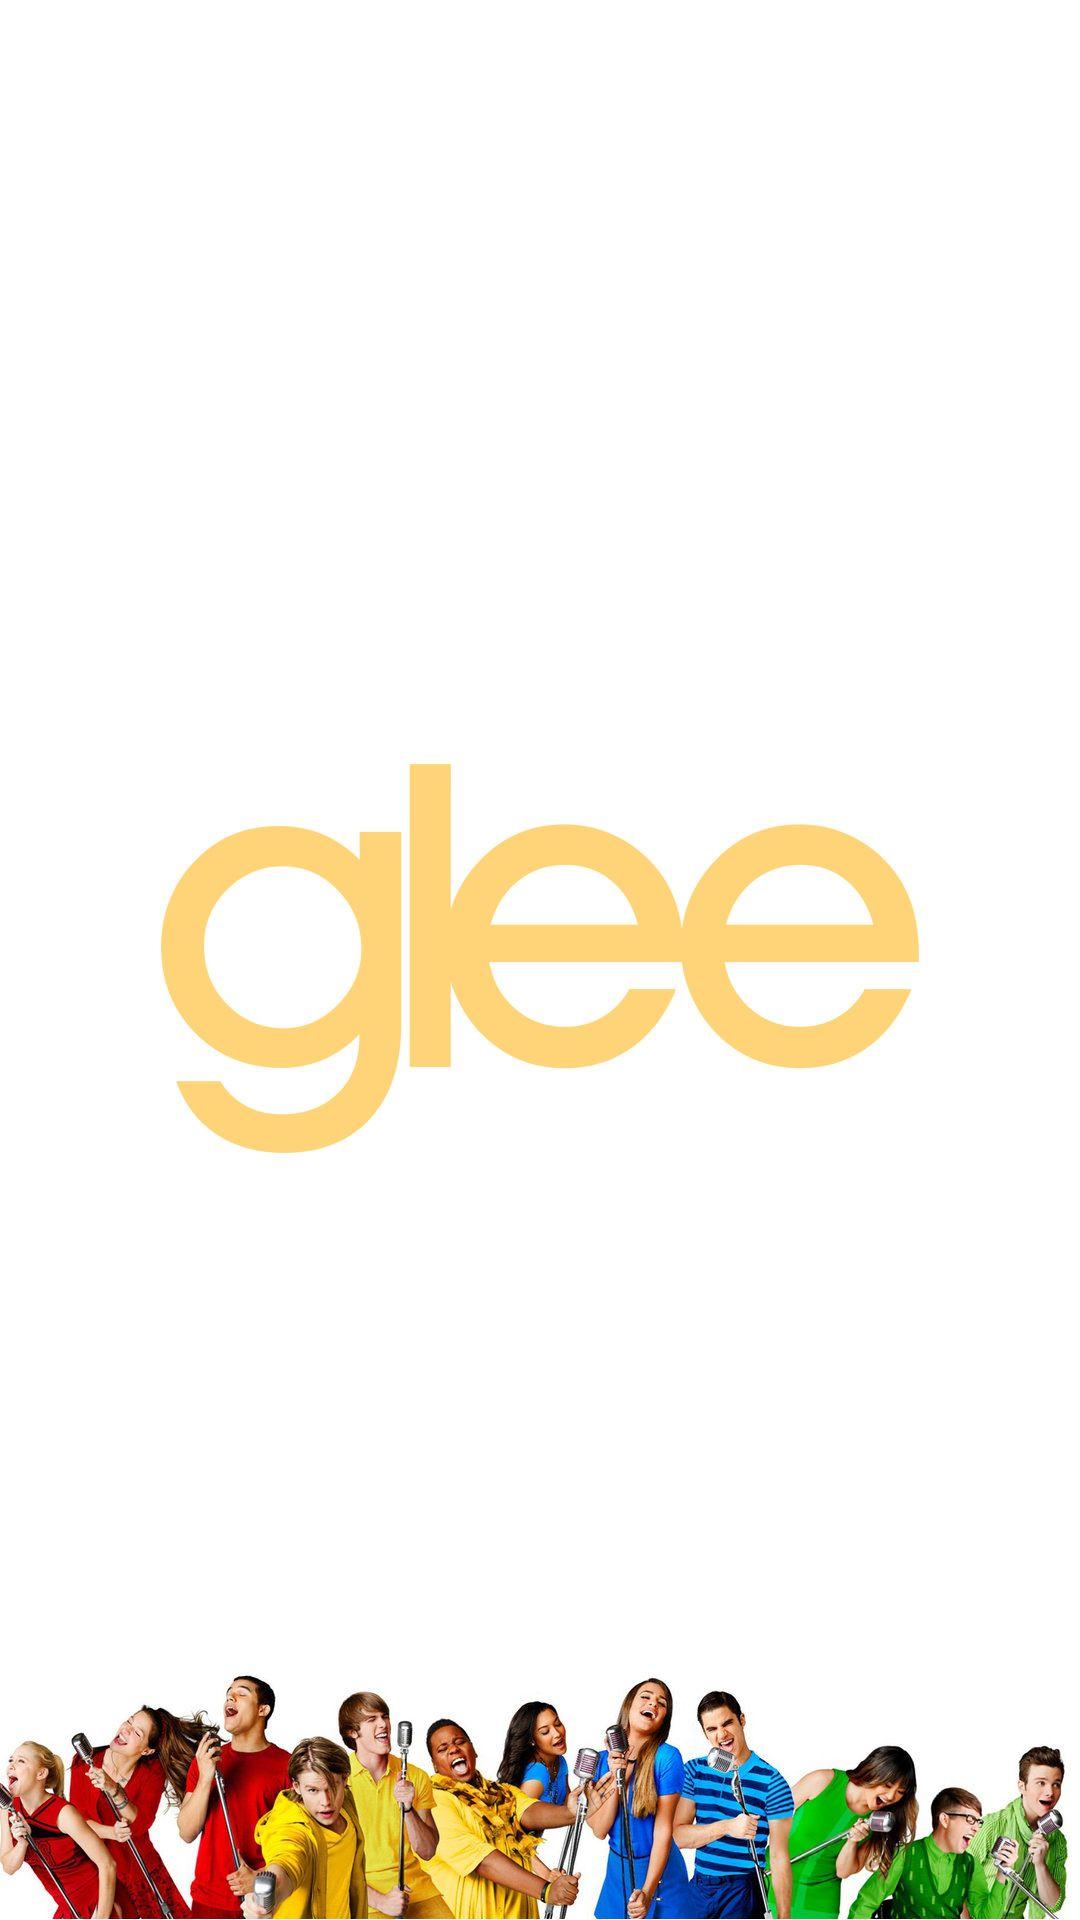 Glee Iphone Wallpapers Top Free Glee Iphone Backgrounds Wallpaperaccess